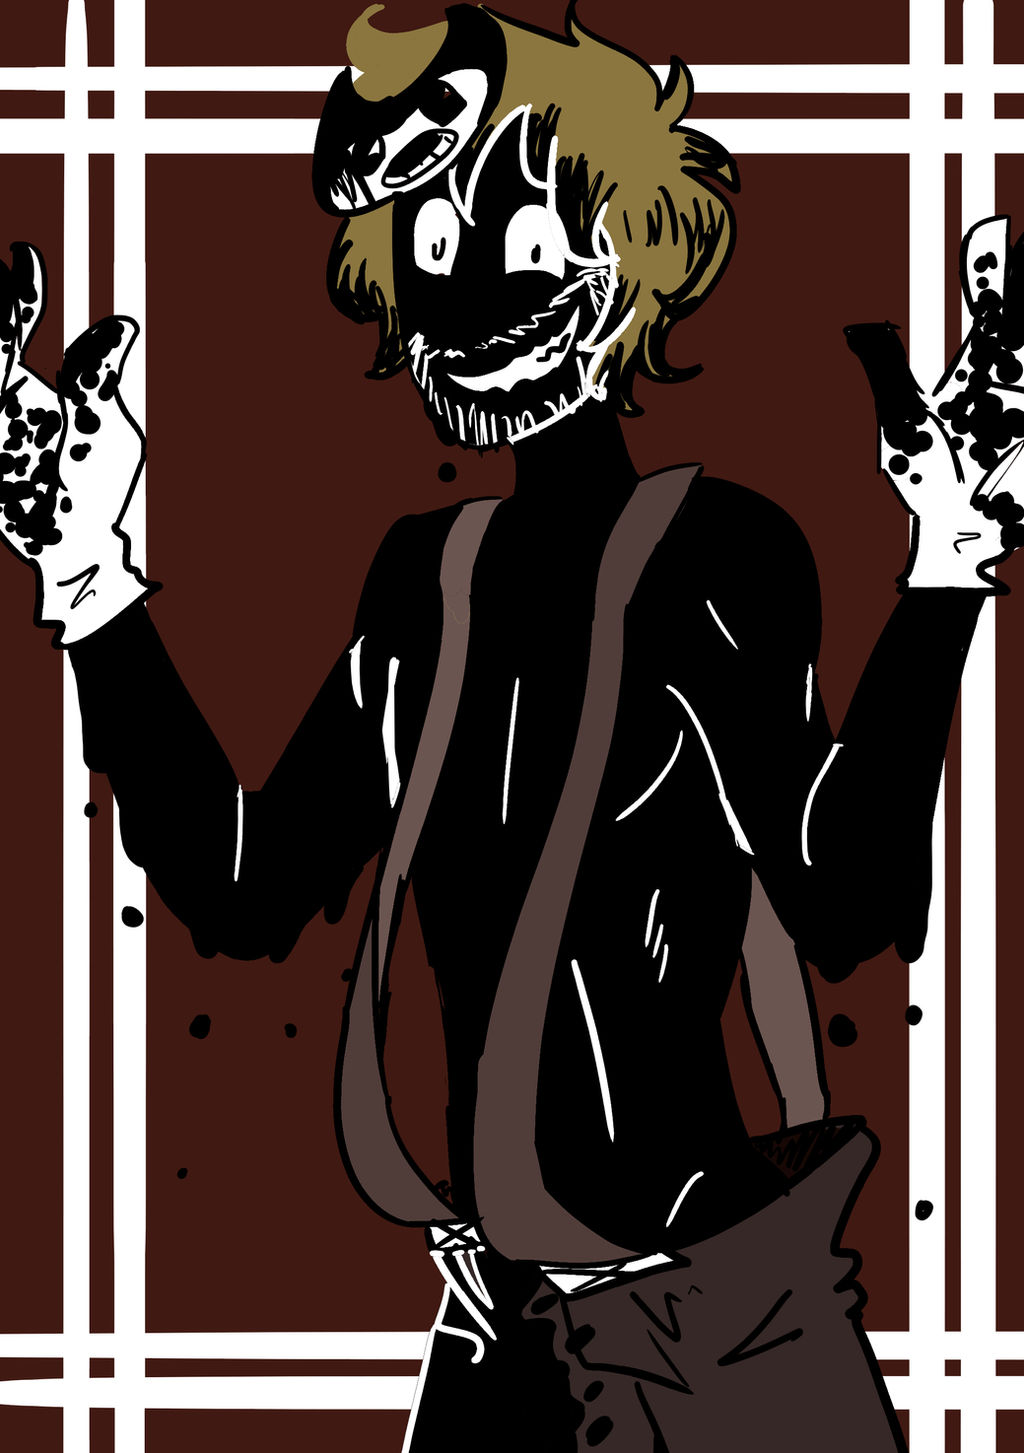 Sammy Lawrence from Bendy and the ink machine by DenKind on DeviantArt